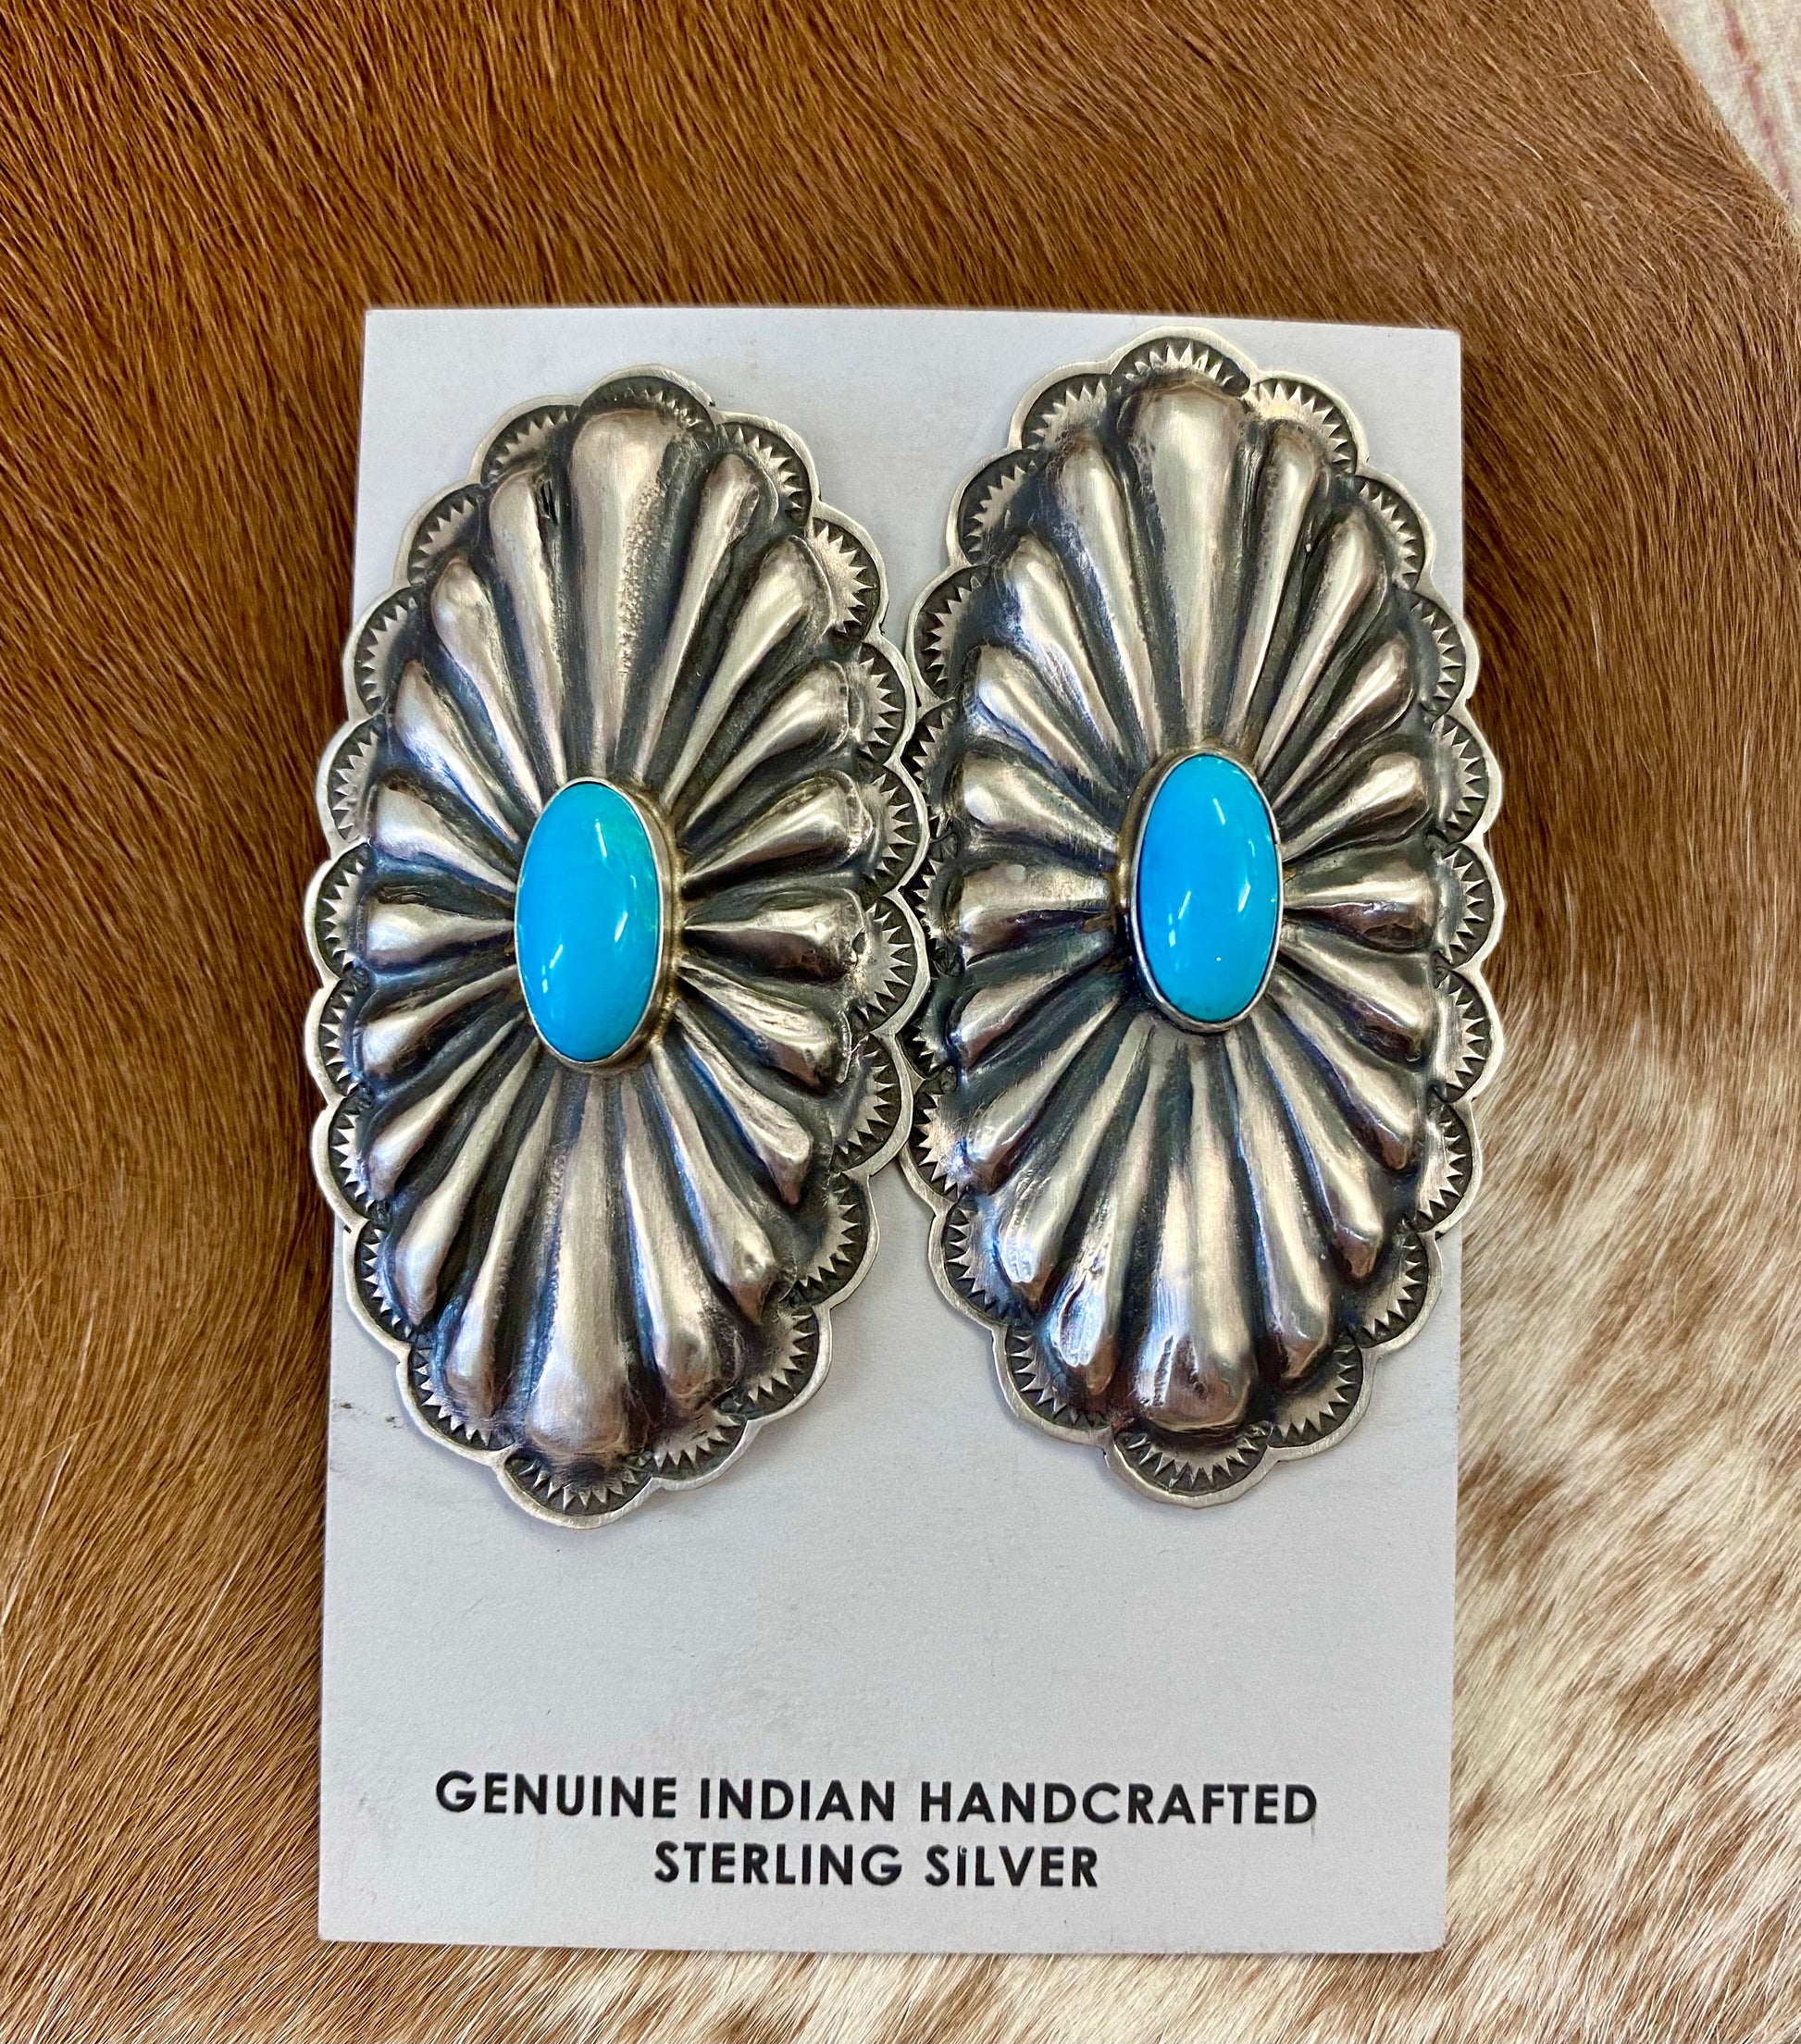 Beautiful large statement Concho sterling silver sleeping beauty turquoise earrings with single stone pieces of turquoise in the center. Stamped sterling and signed by Native American artist silversmith Rita Lee. The perfect set of earrings to add in to anyone's jewelry collection. Dress them up or down!    Size: 2 1/2" Inches Long x  1 1/4" Inches Wide  Hallmark/Artist: Rita Lee  Stone: Turquoise 